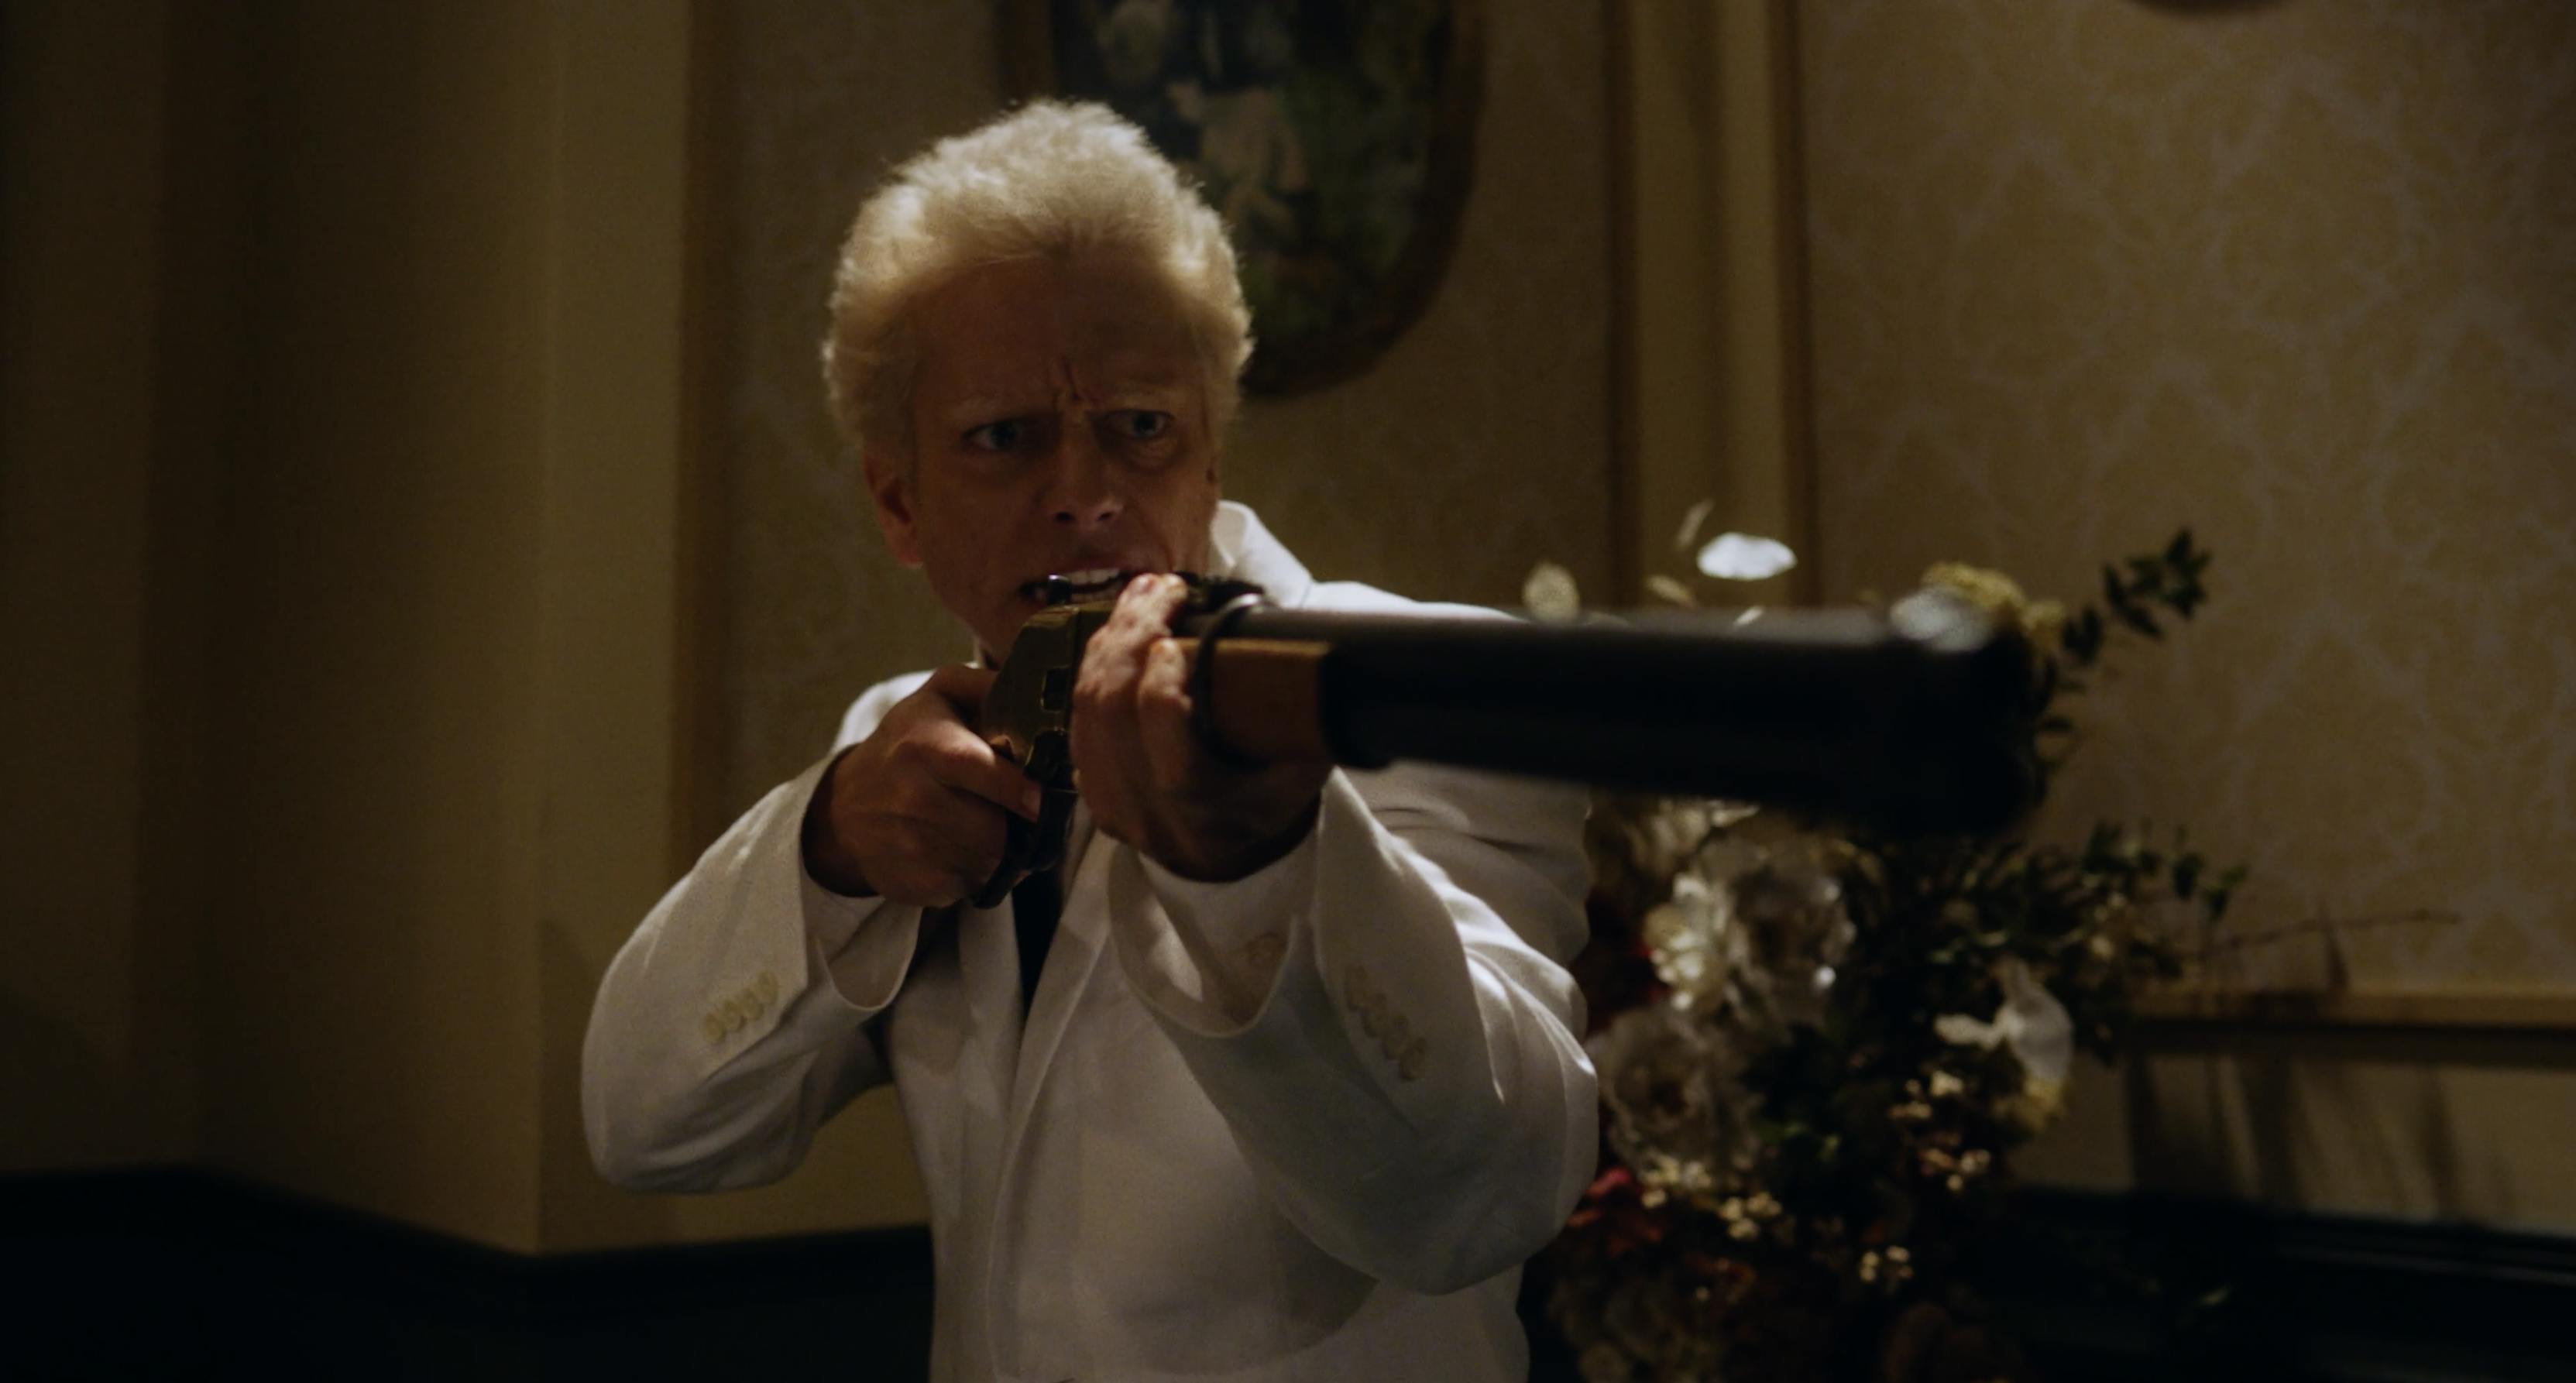 A man in a white suit holds a shotgun